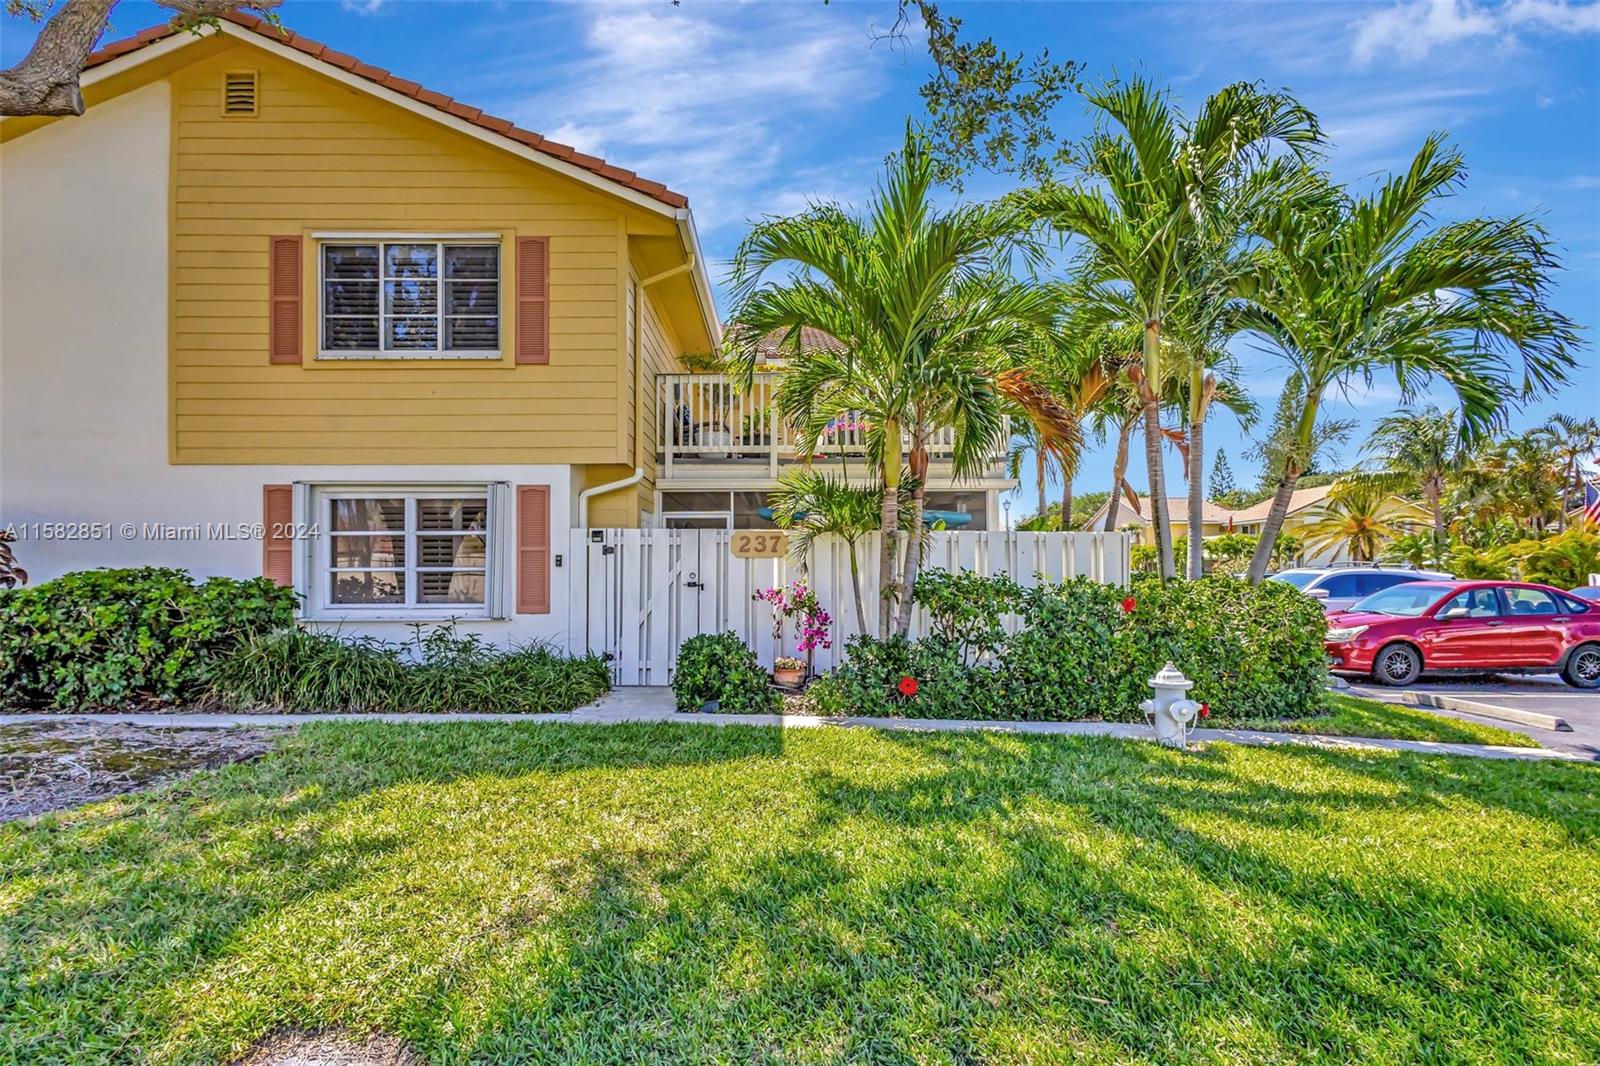 Property for Sale at 237 Seabreeze Cir Cir, Jupiter, Palm Beach County, Florida - Bedrooms: 2 
Bathrooms: 3  - $549,900